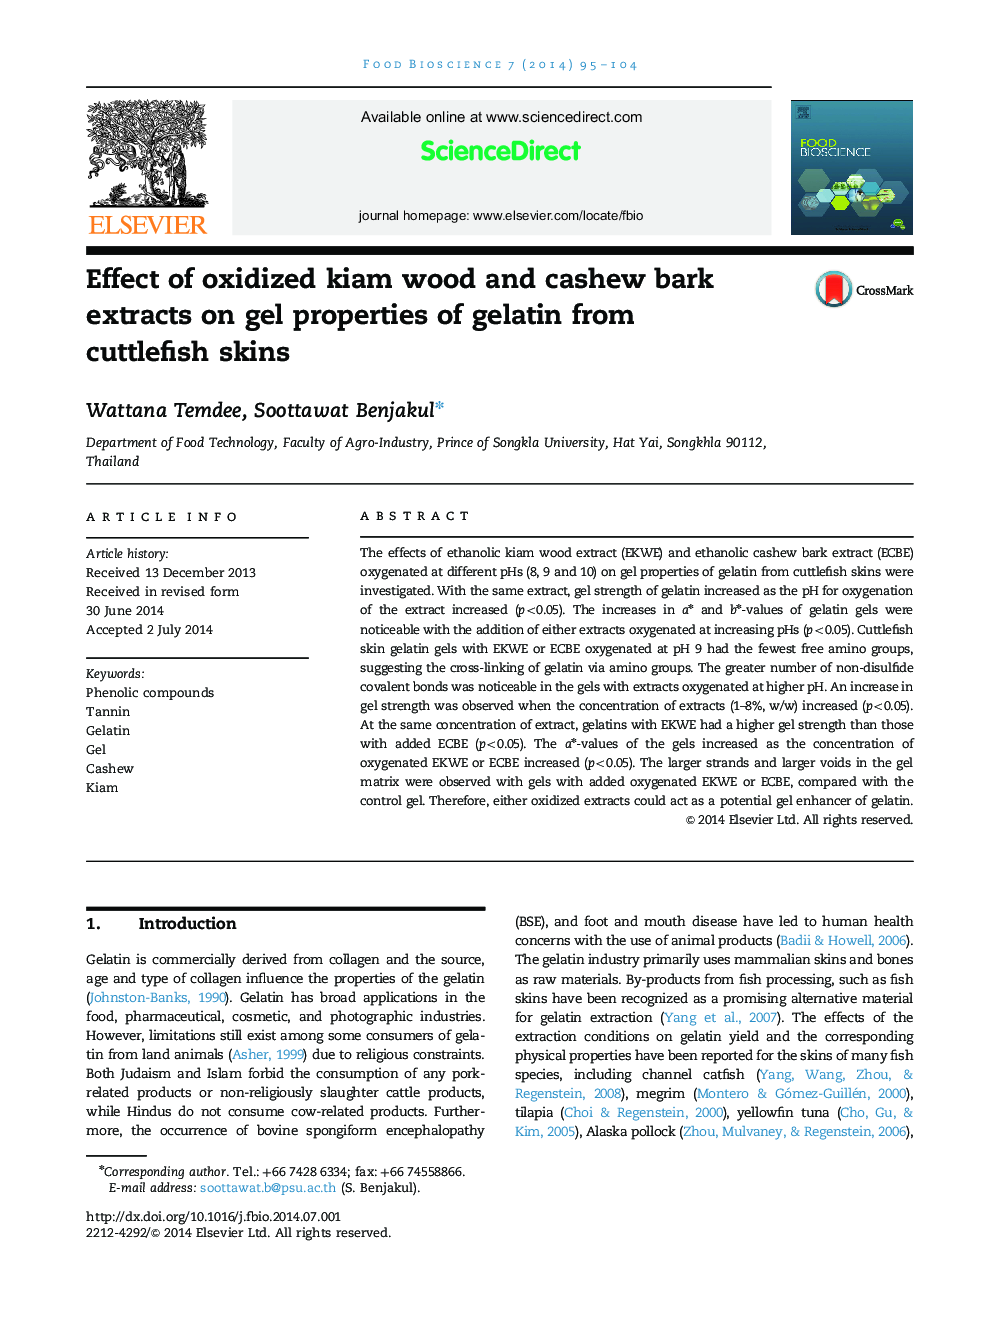 Effect of oxidized kiam wood and cashew bark extracts on gel properties of gelatin from cuttlefish skins